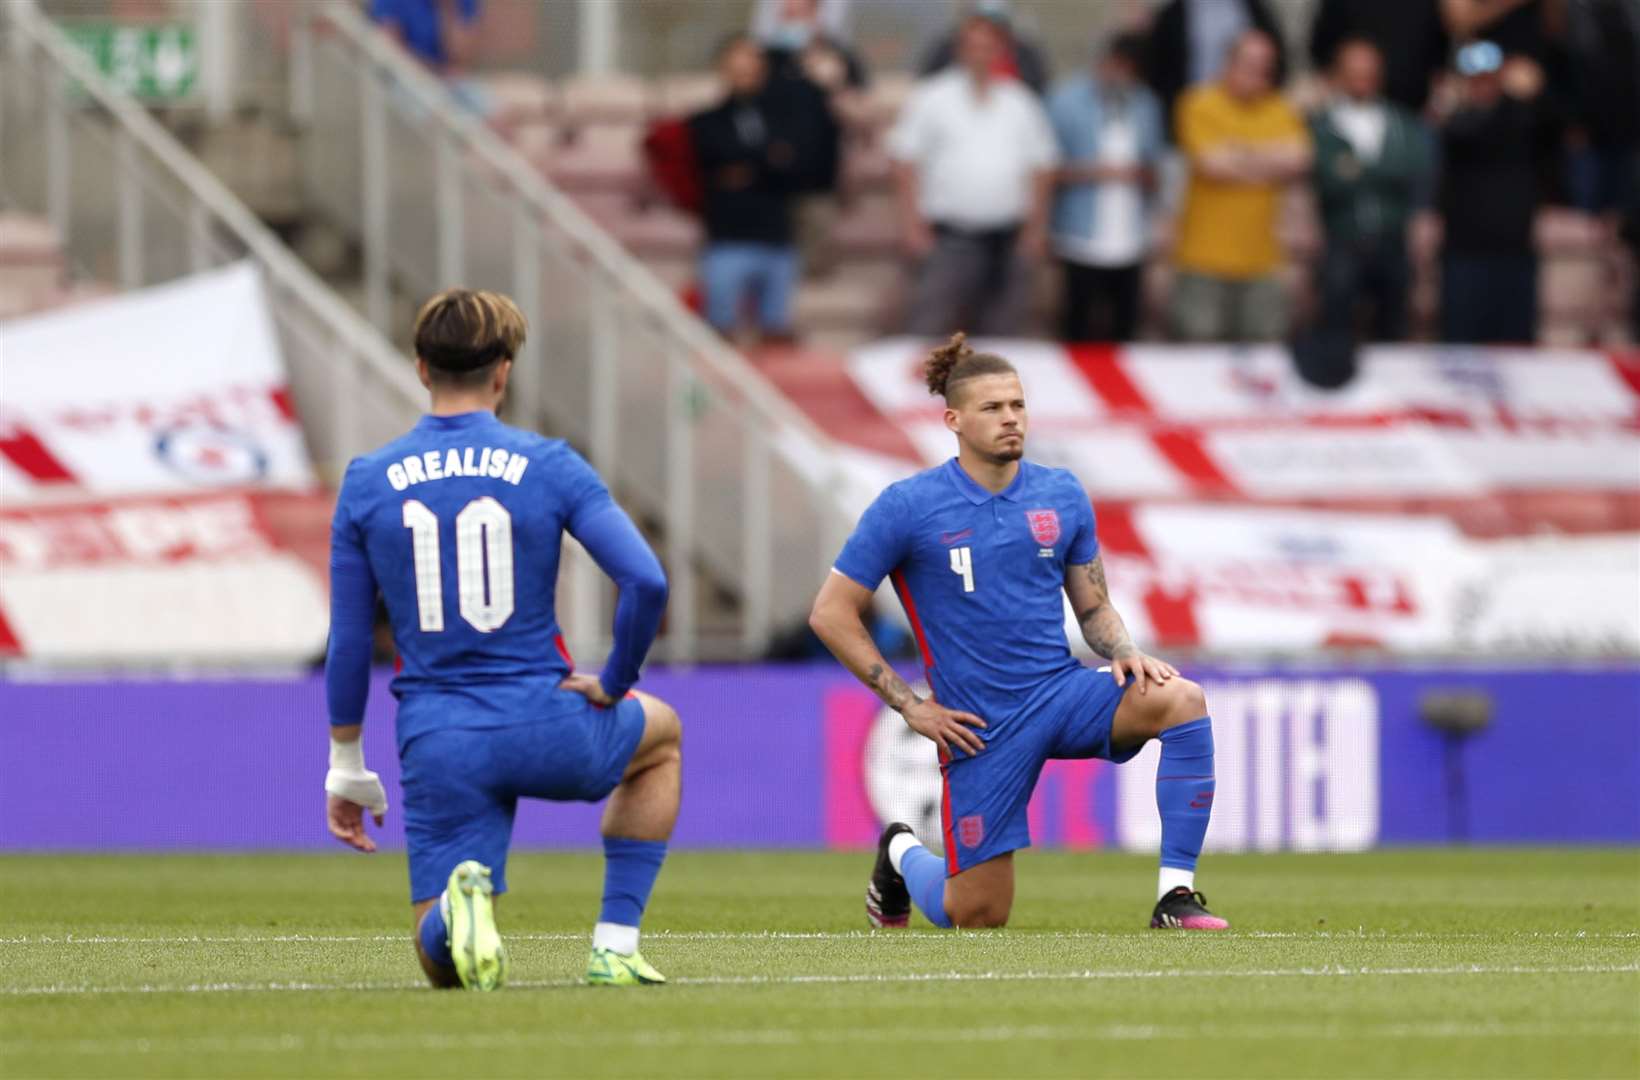 England’s Jack Grealish and Kalvin Phillips take a knee before the international friendly match against Romania last month (Lee Smith/PA)